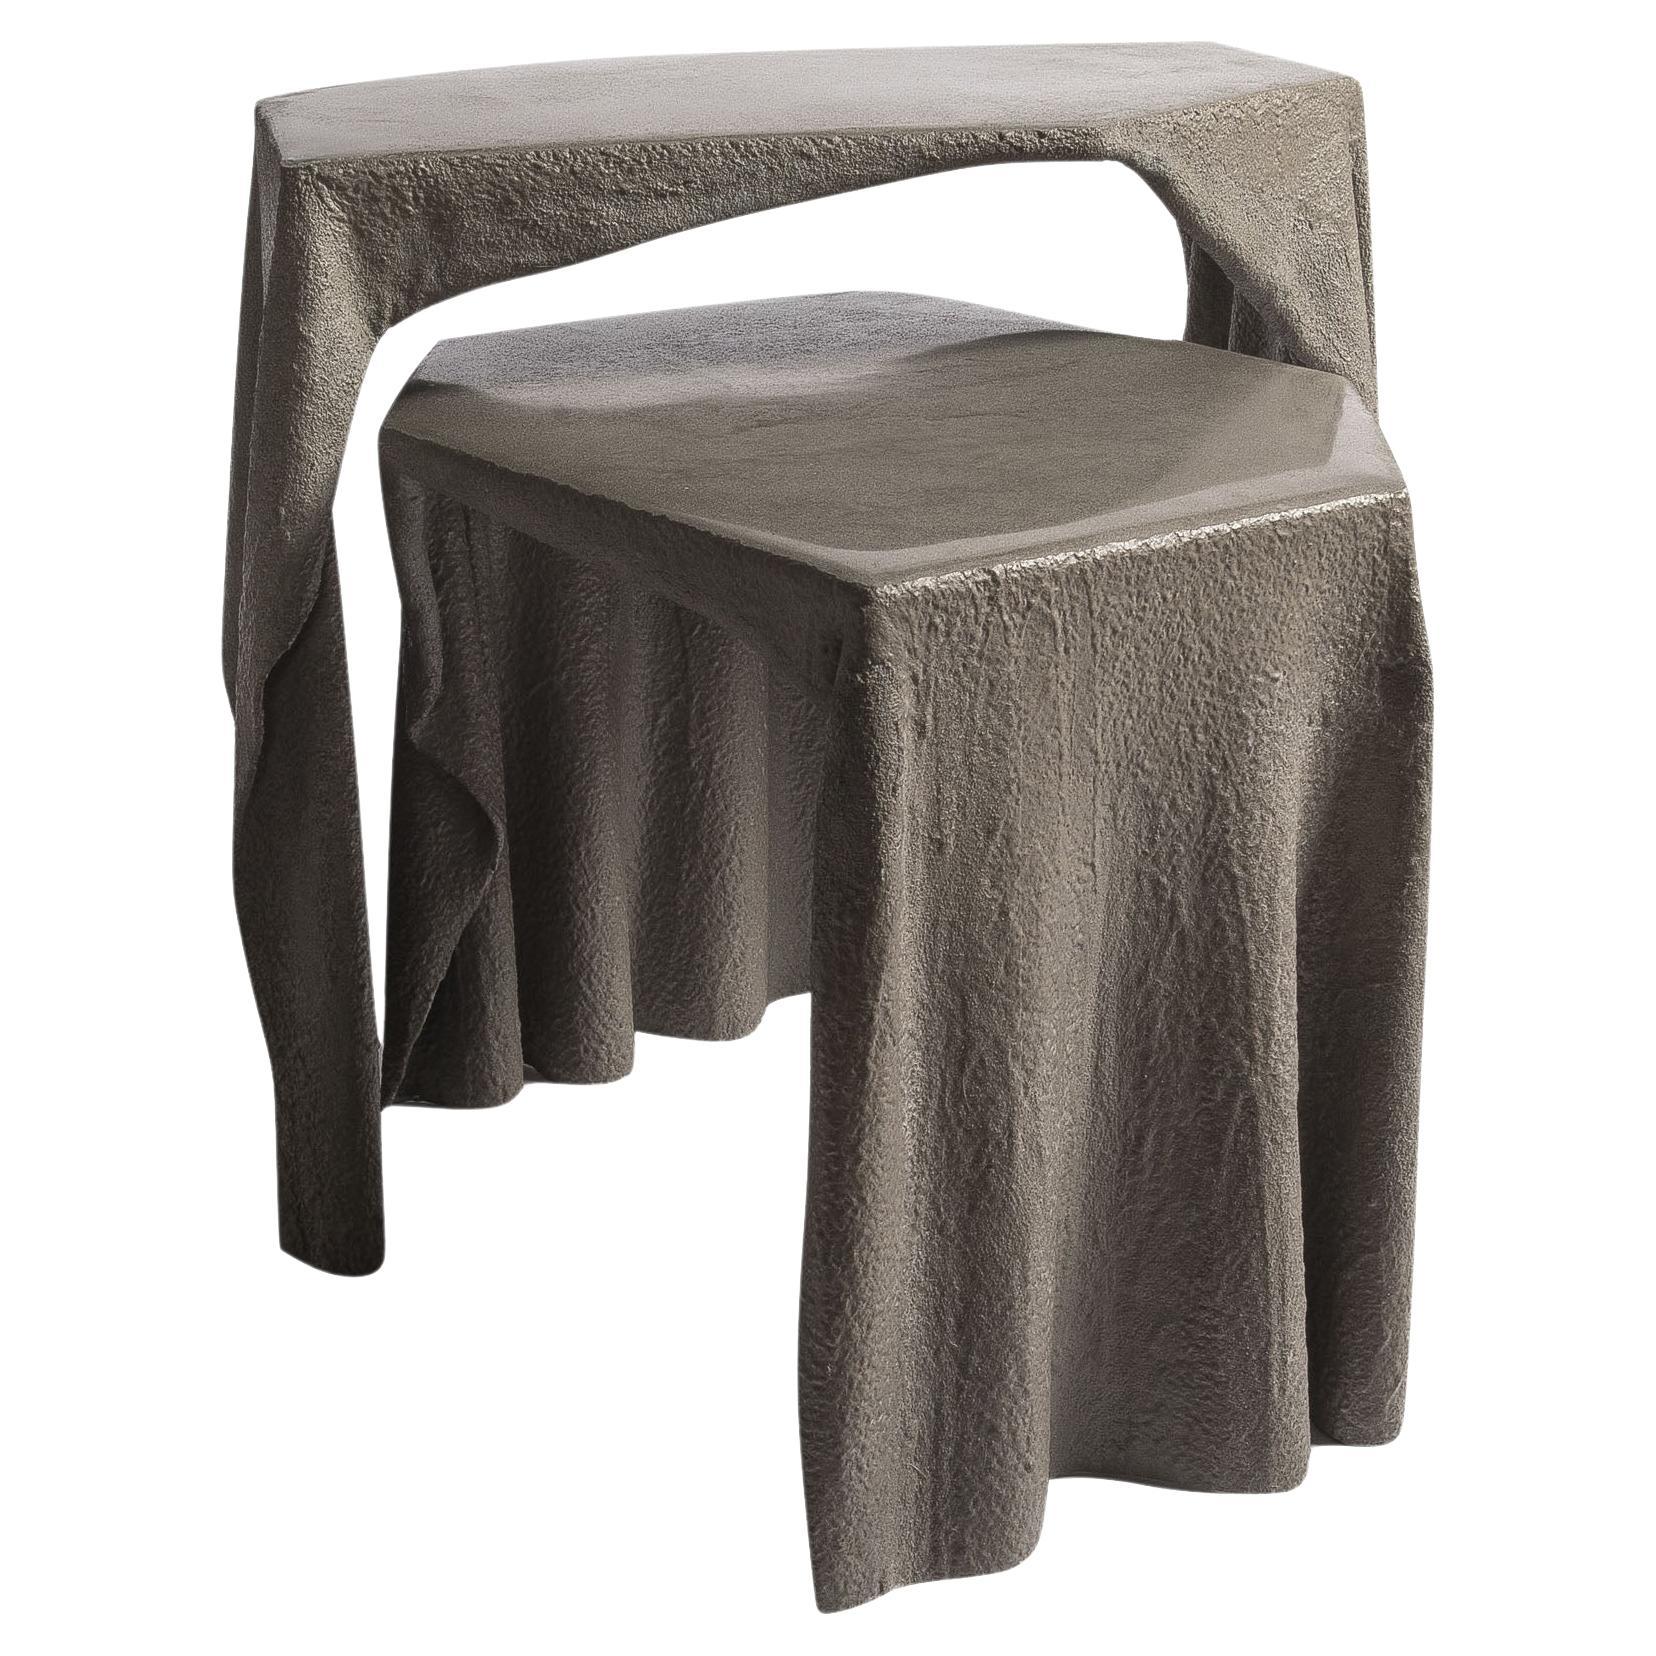 Concrete Fabric Table For Sale